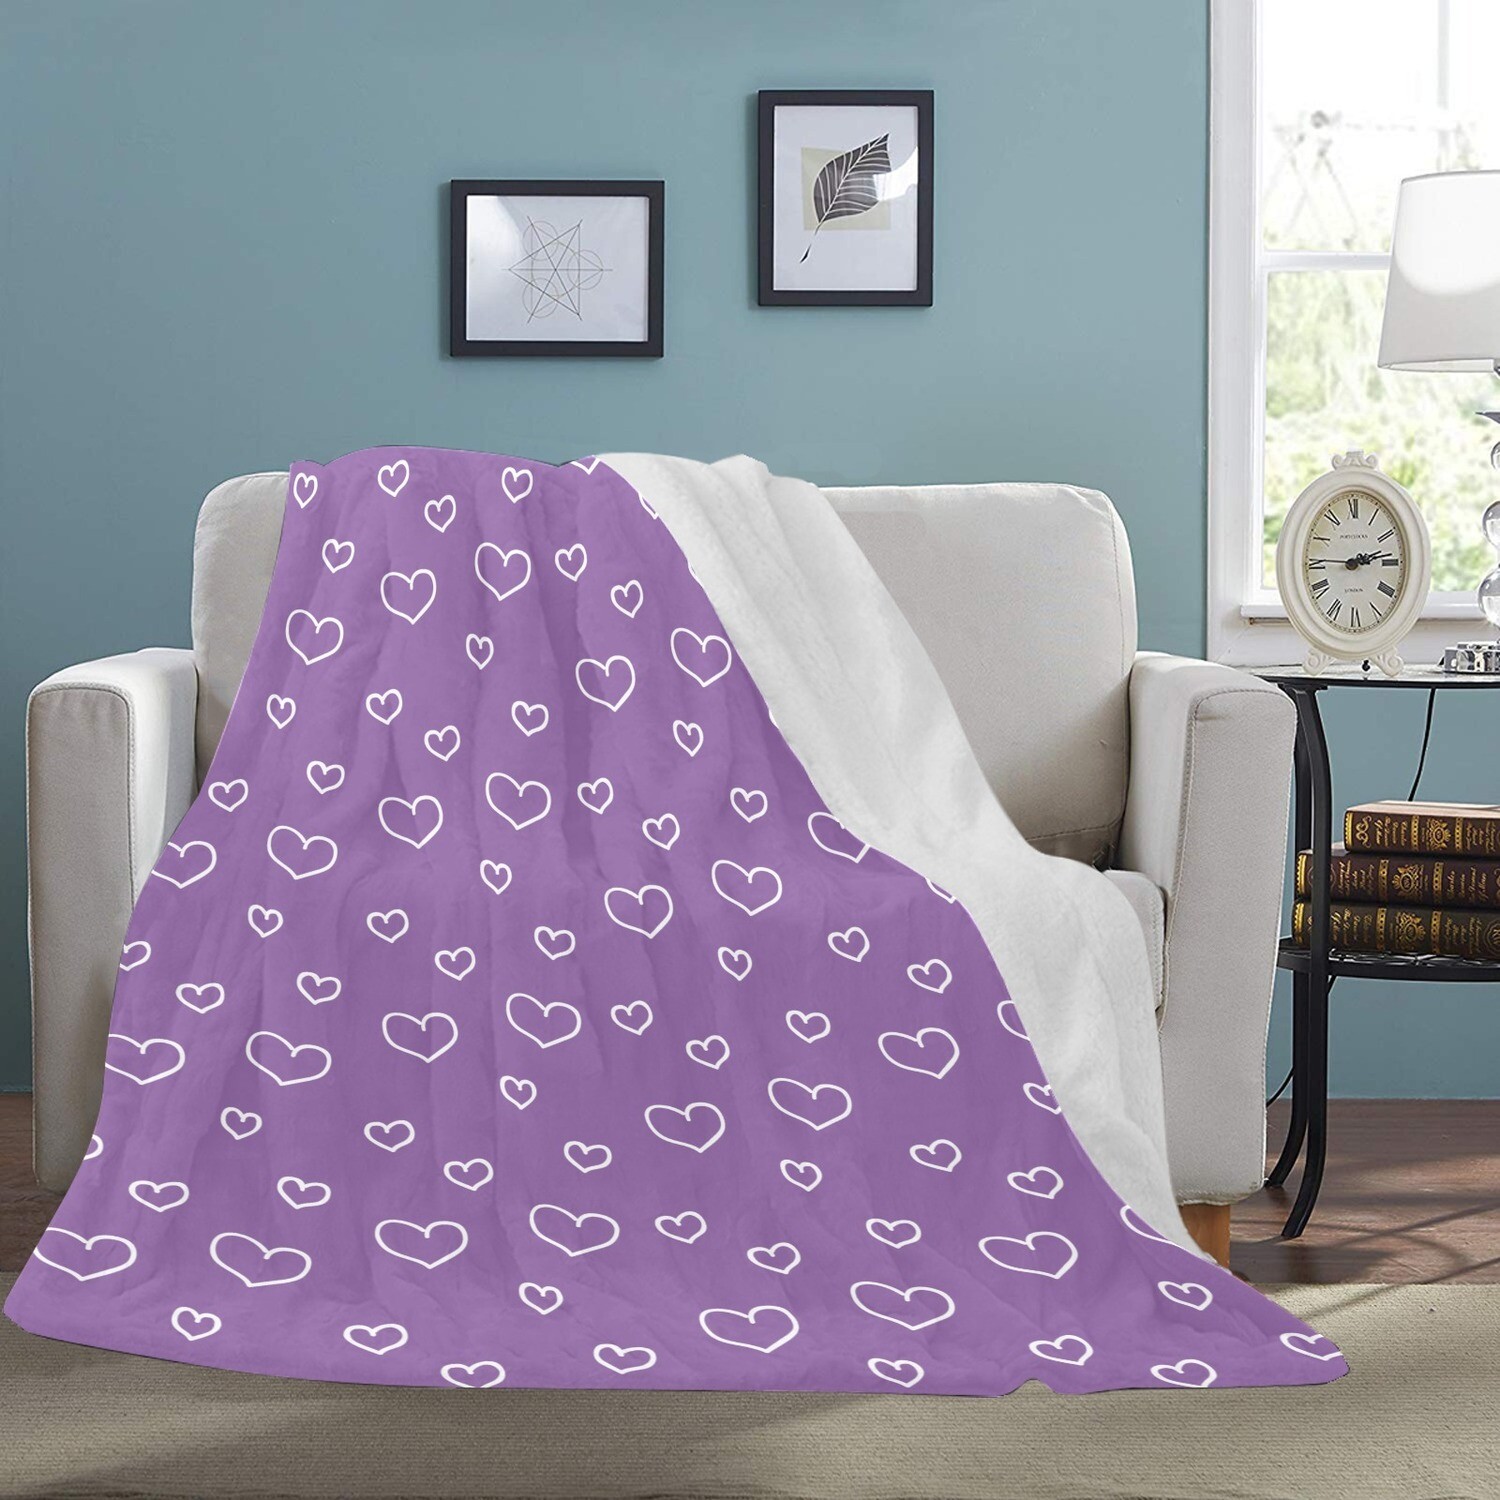 🤴🏽👸🏽💕Large Ultra-Soft Micro Fleece Blanket Valentine white outline hearts on amethyst orchid purple, gift, gift for her, gift for him, gift for them, 70"x80"